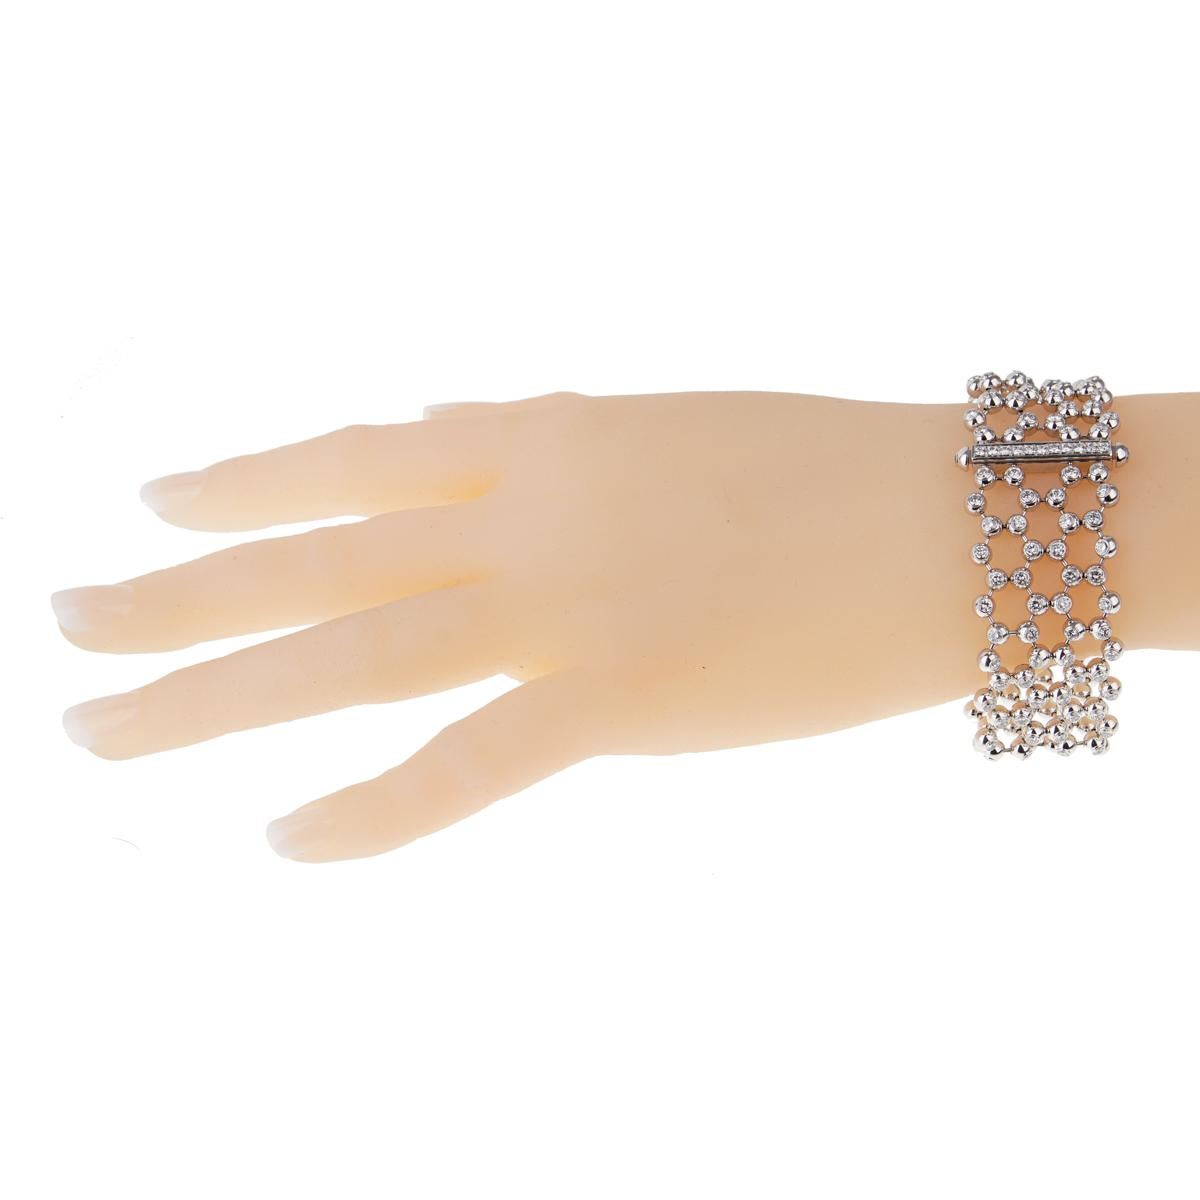 This Cartier diamond gold tennis bracelet is a perfect example of craftsmanship meeting flawless design. 8.2 carats of the finest Cartier round brilliant cut diamonds are embedded throughout this Cartier multi strand diamond gold tennis bracelet,